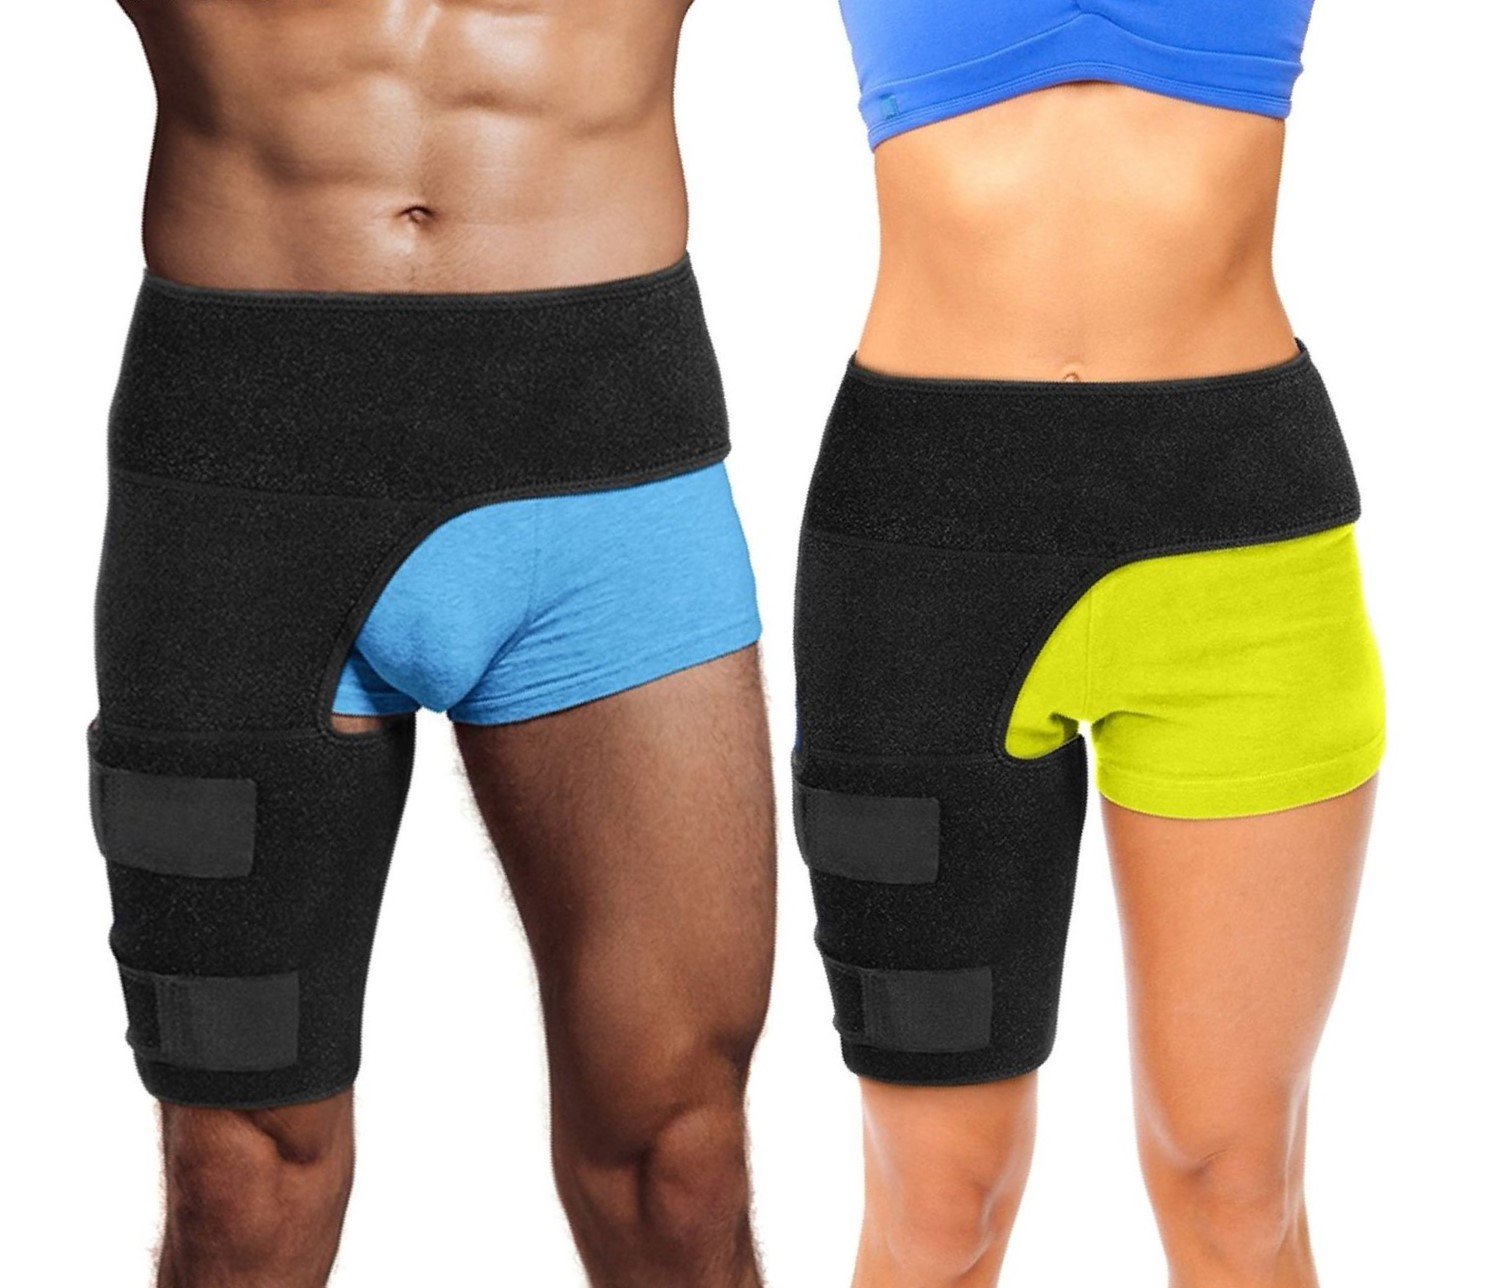 Compression Support for Hip and Lower Back